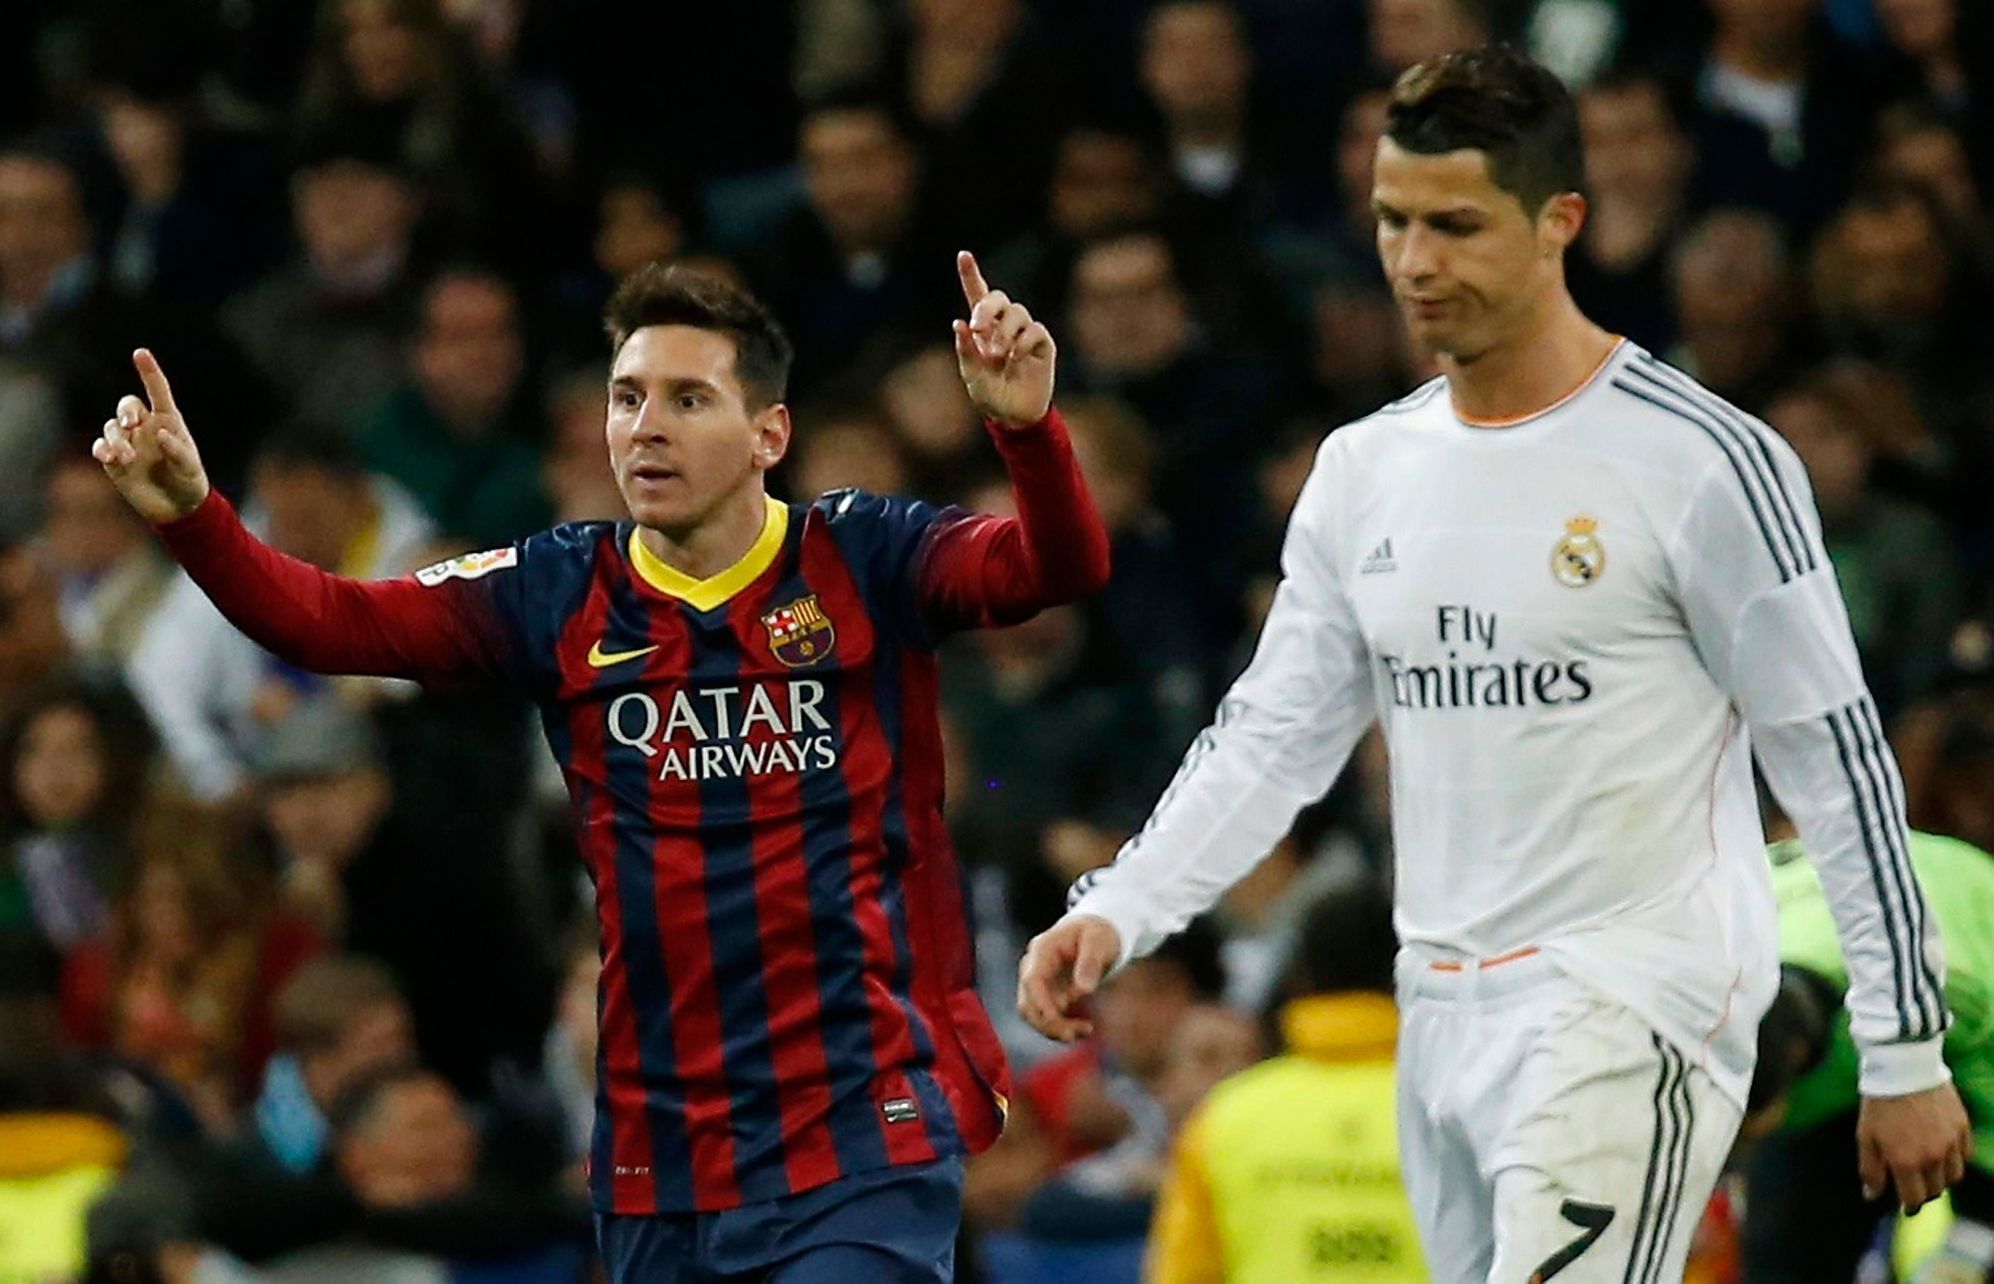 Barcelona's Lionel Messi celebrates a goal next to Real Madrid's Cristiano Ronaldo during La Liga's second 'Clasico' soccer match of the season in Madrid